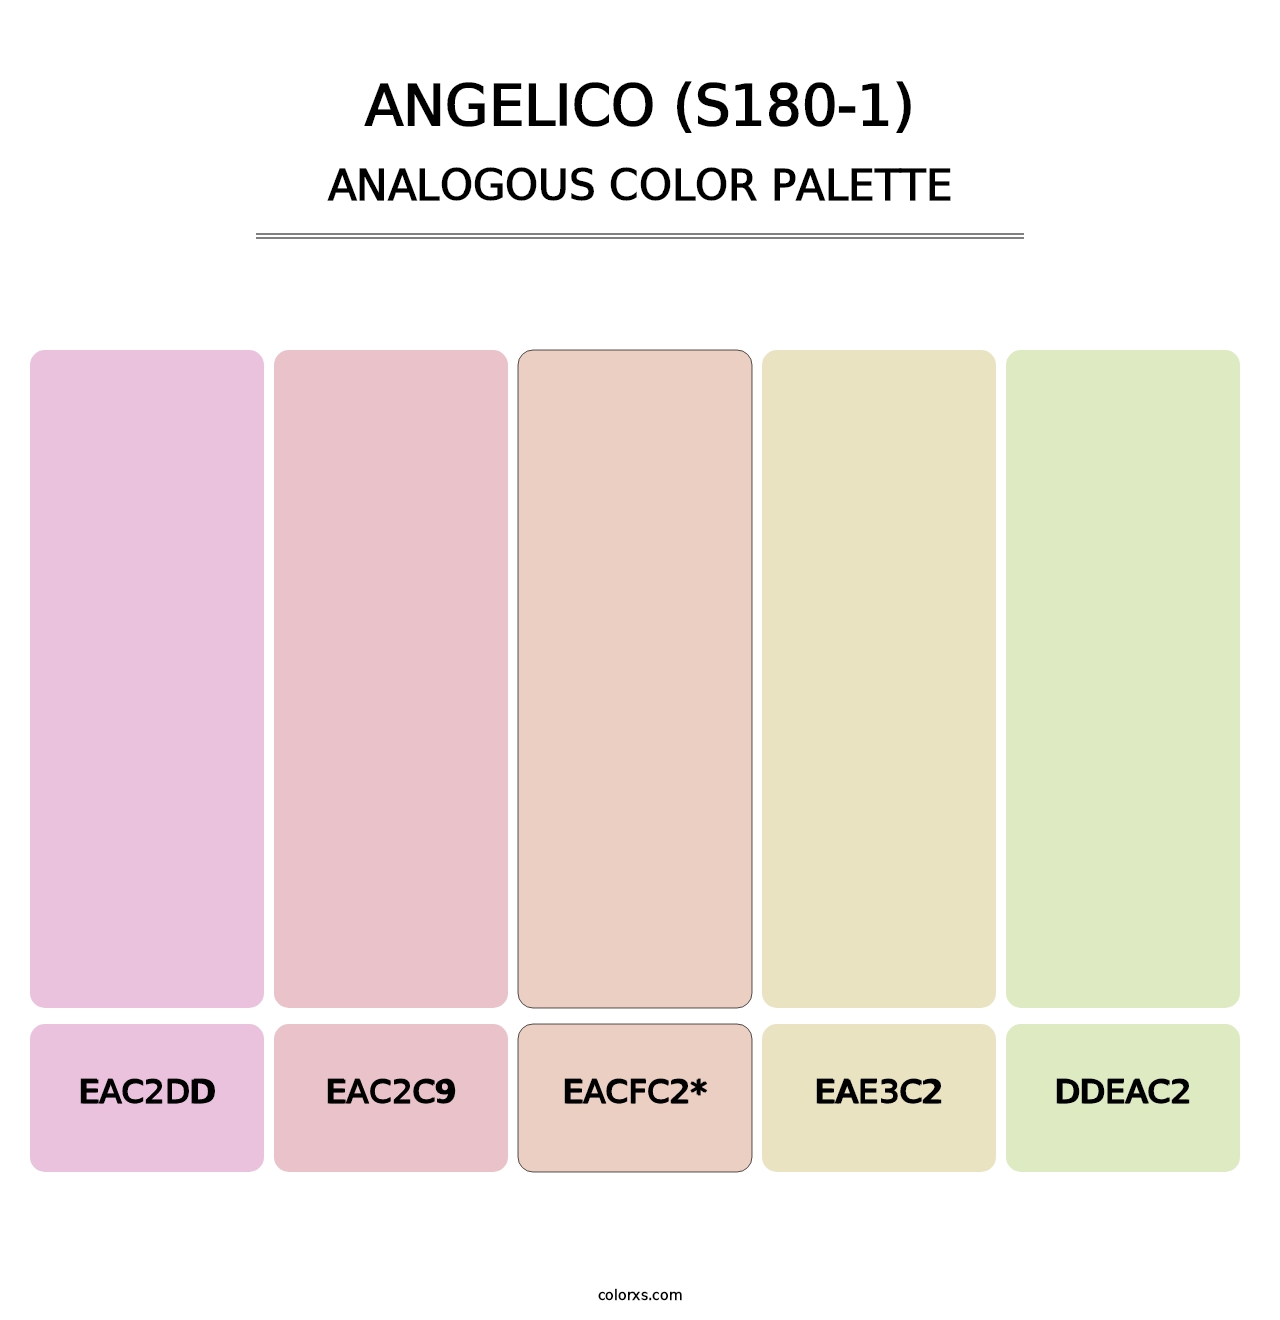 Angelico (S180-1) - Analogous Color Palette